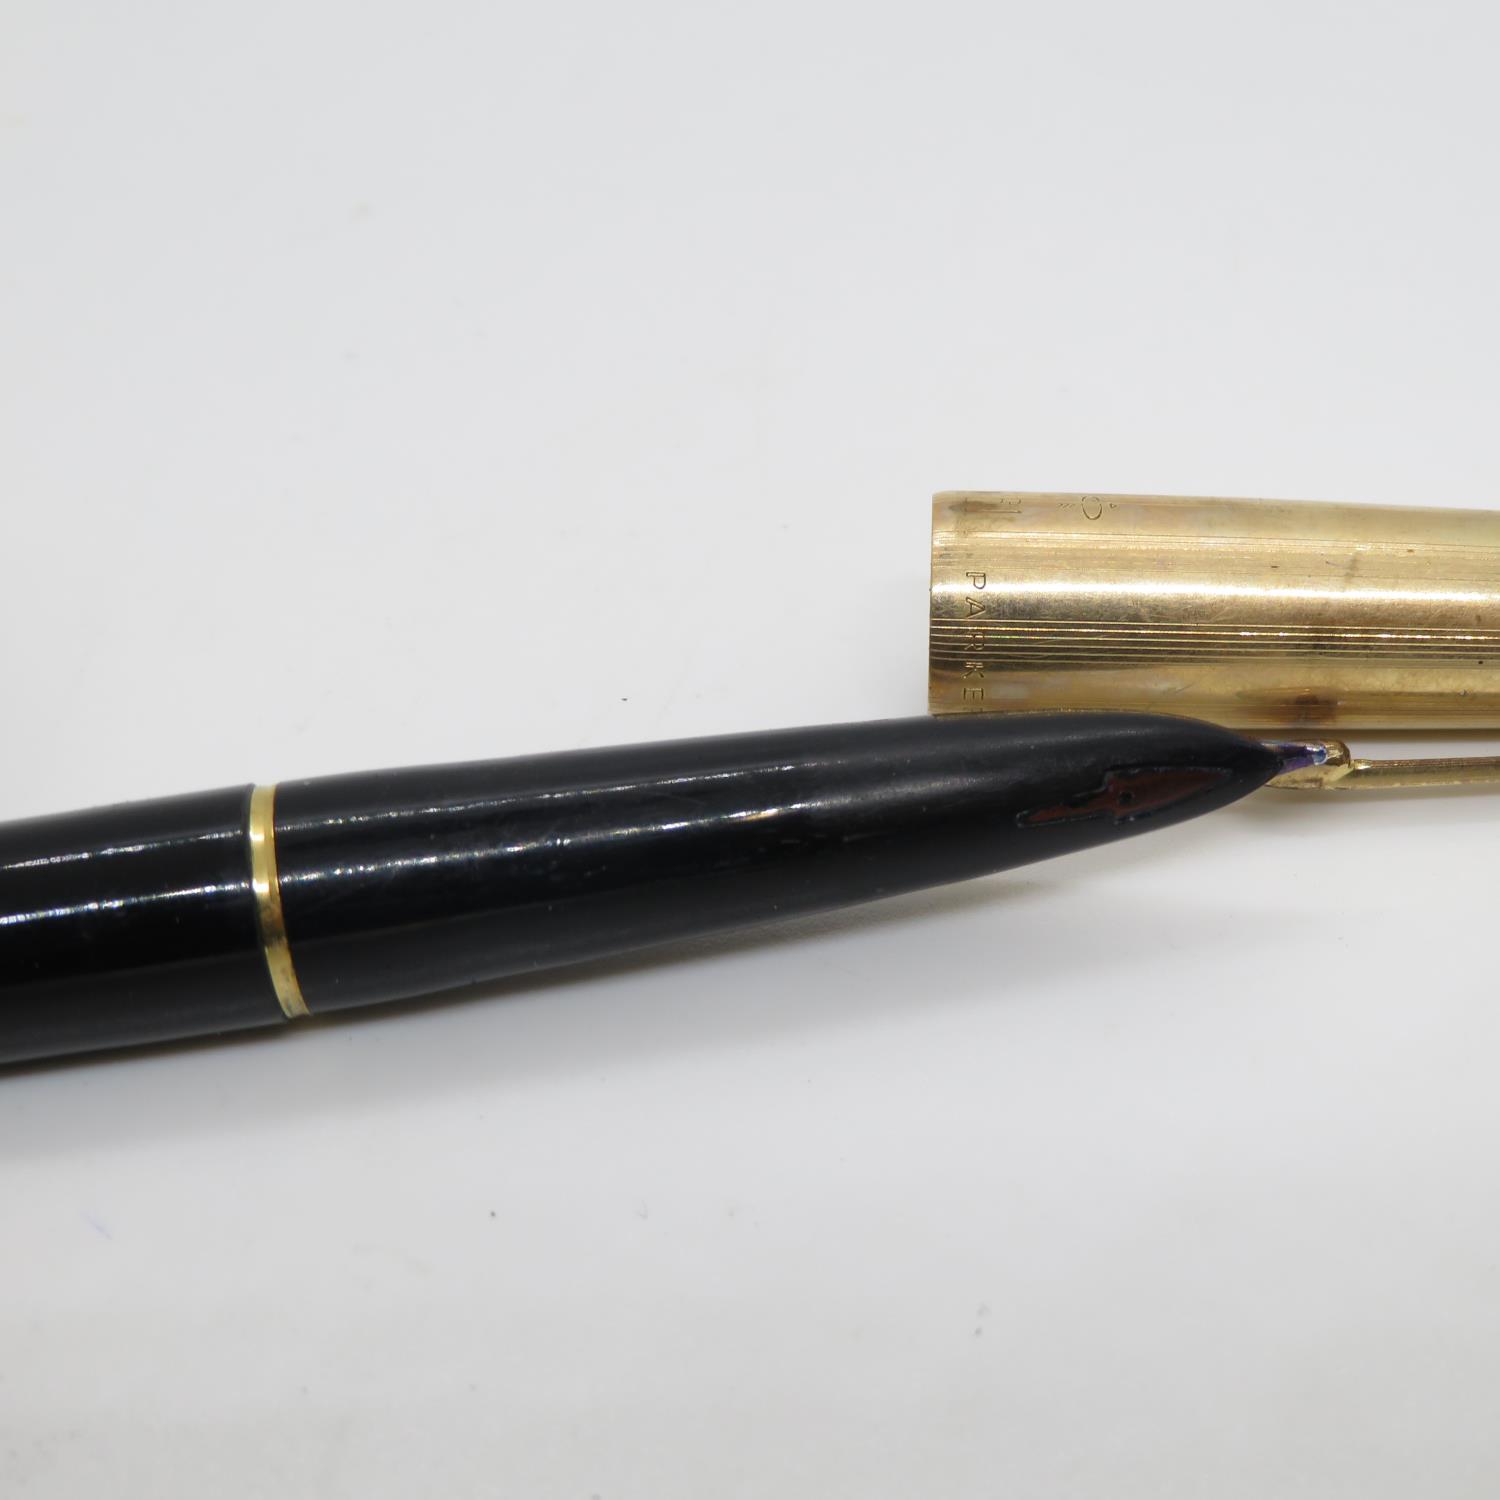 Parker 61 fountain pen slight damage (crack) to pen body otherwise good condition - Image 3 of 4